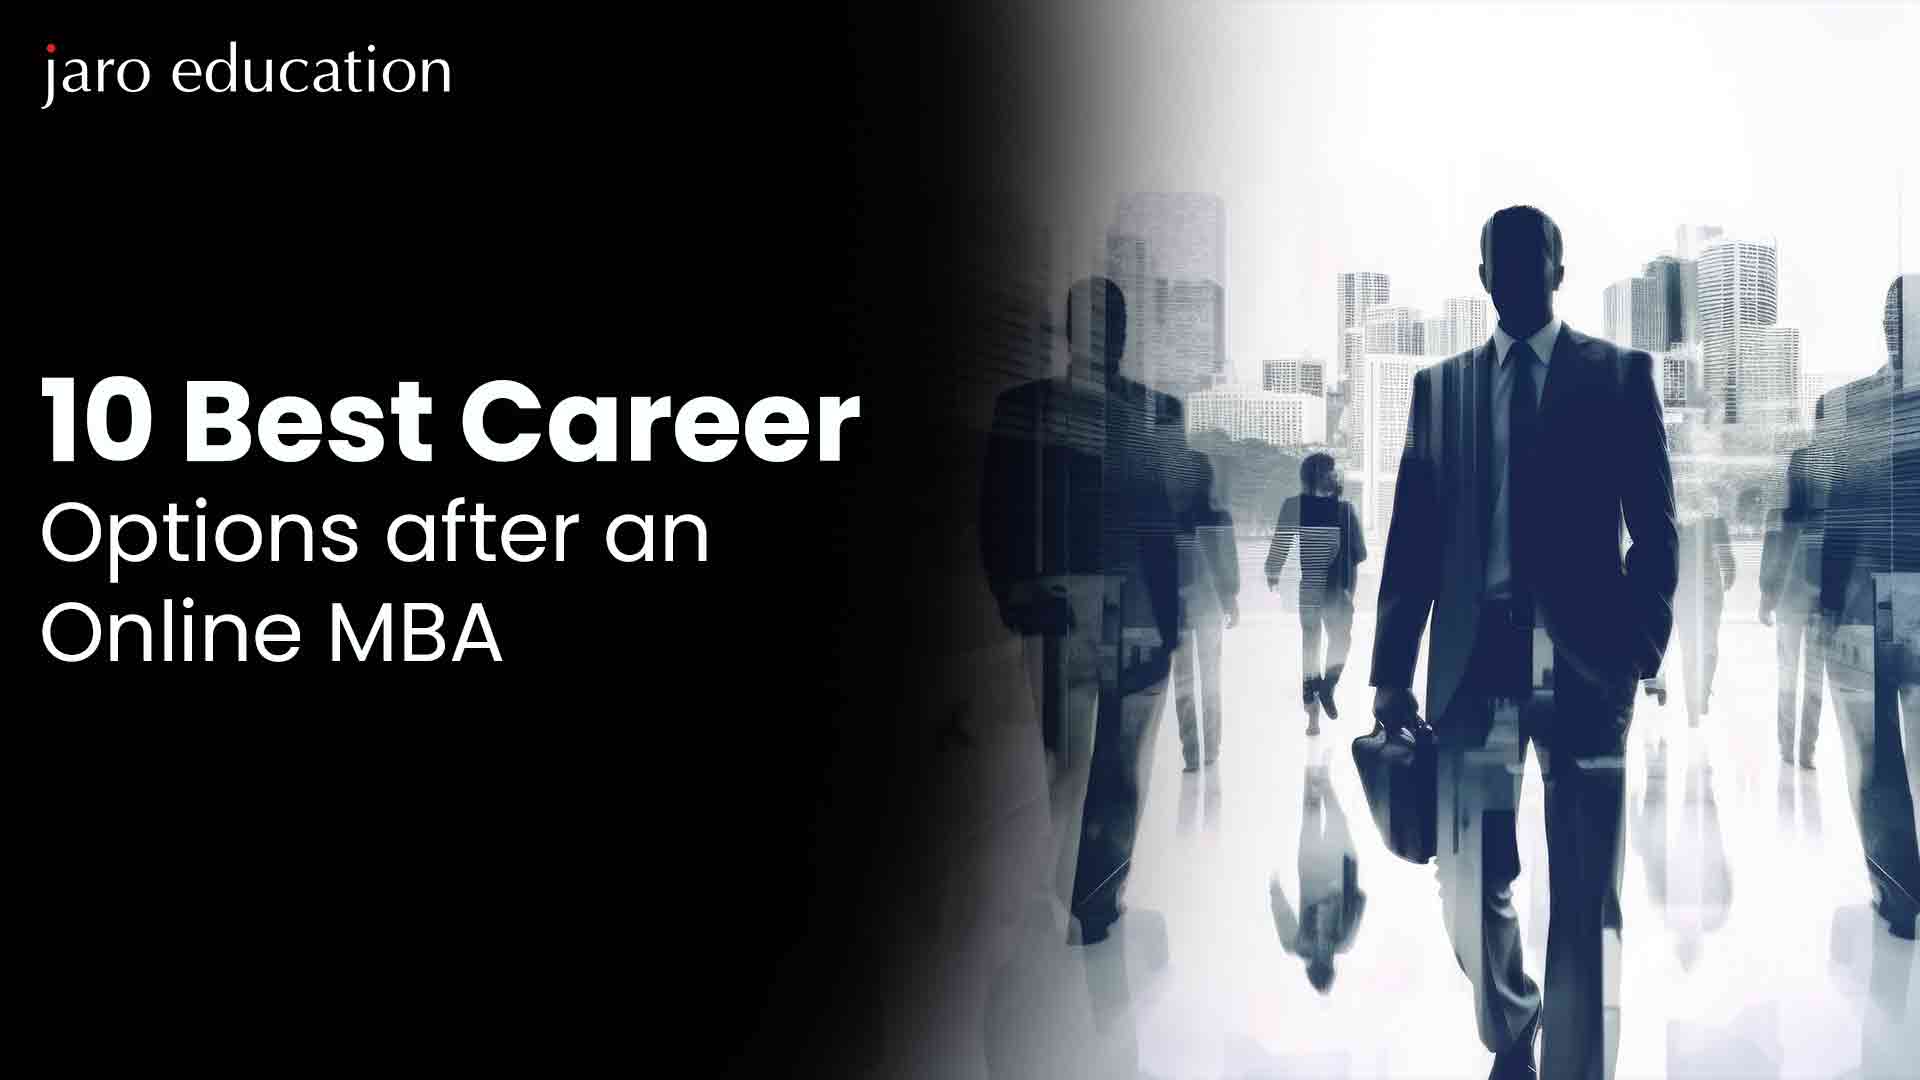 10 Best Career Options after an Online MBA